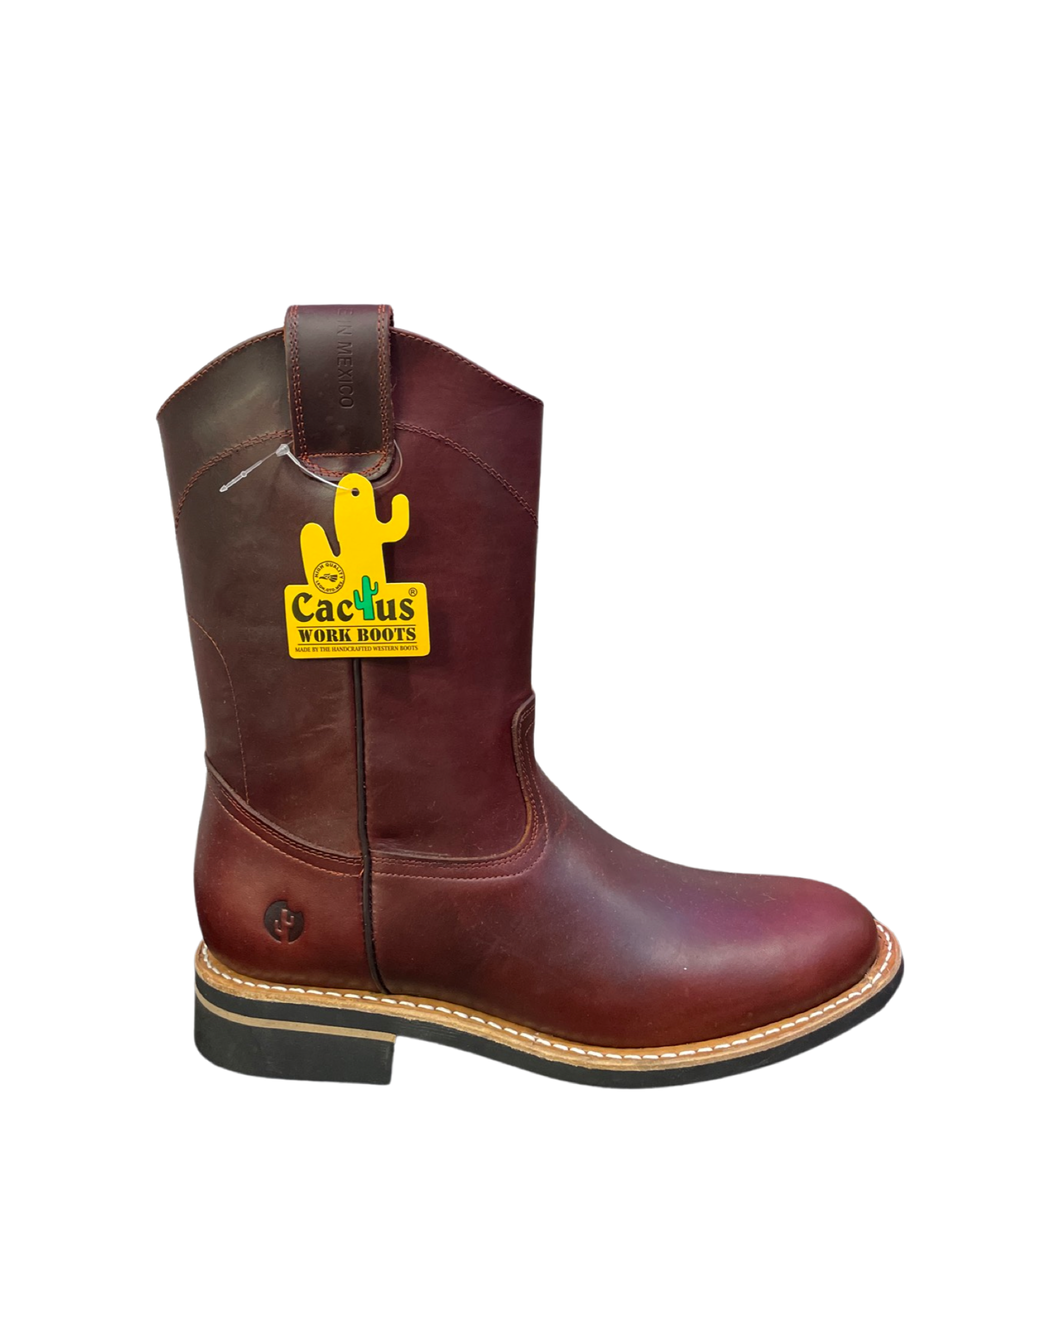 Cactus 7850 Shedron Boot